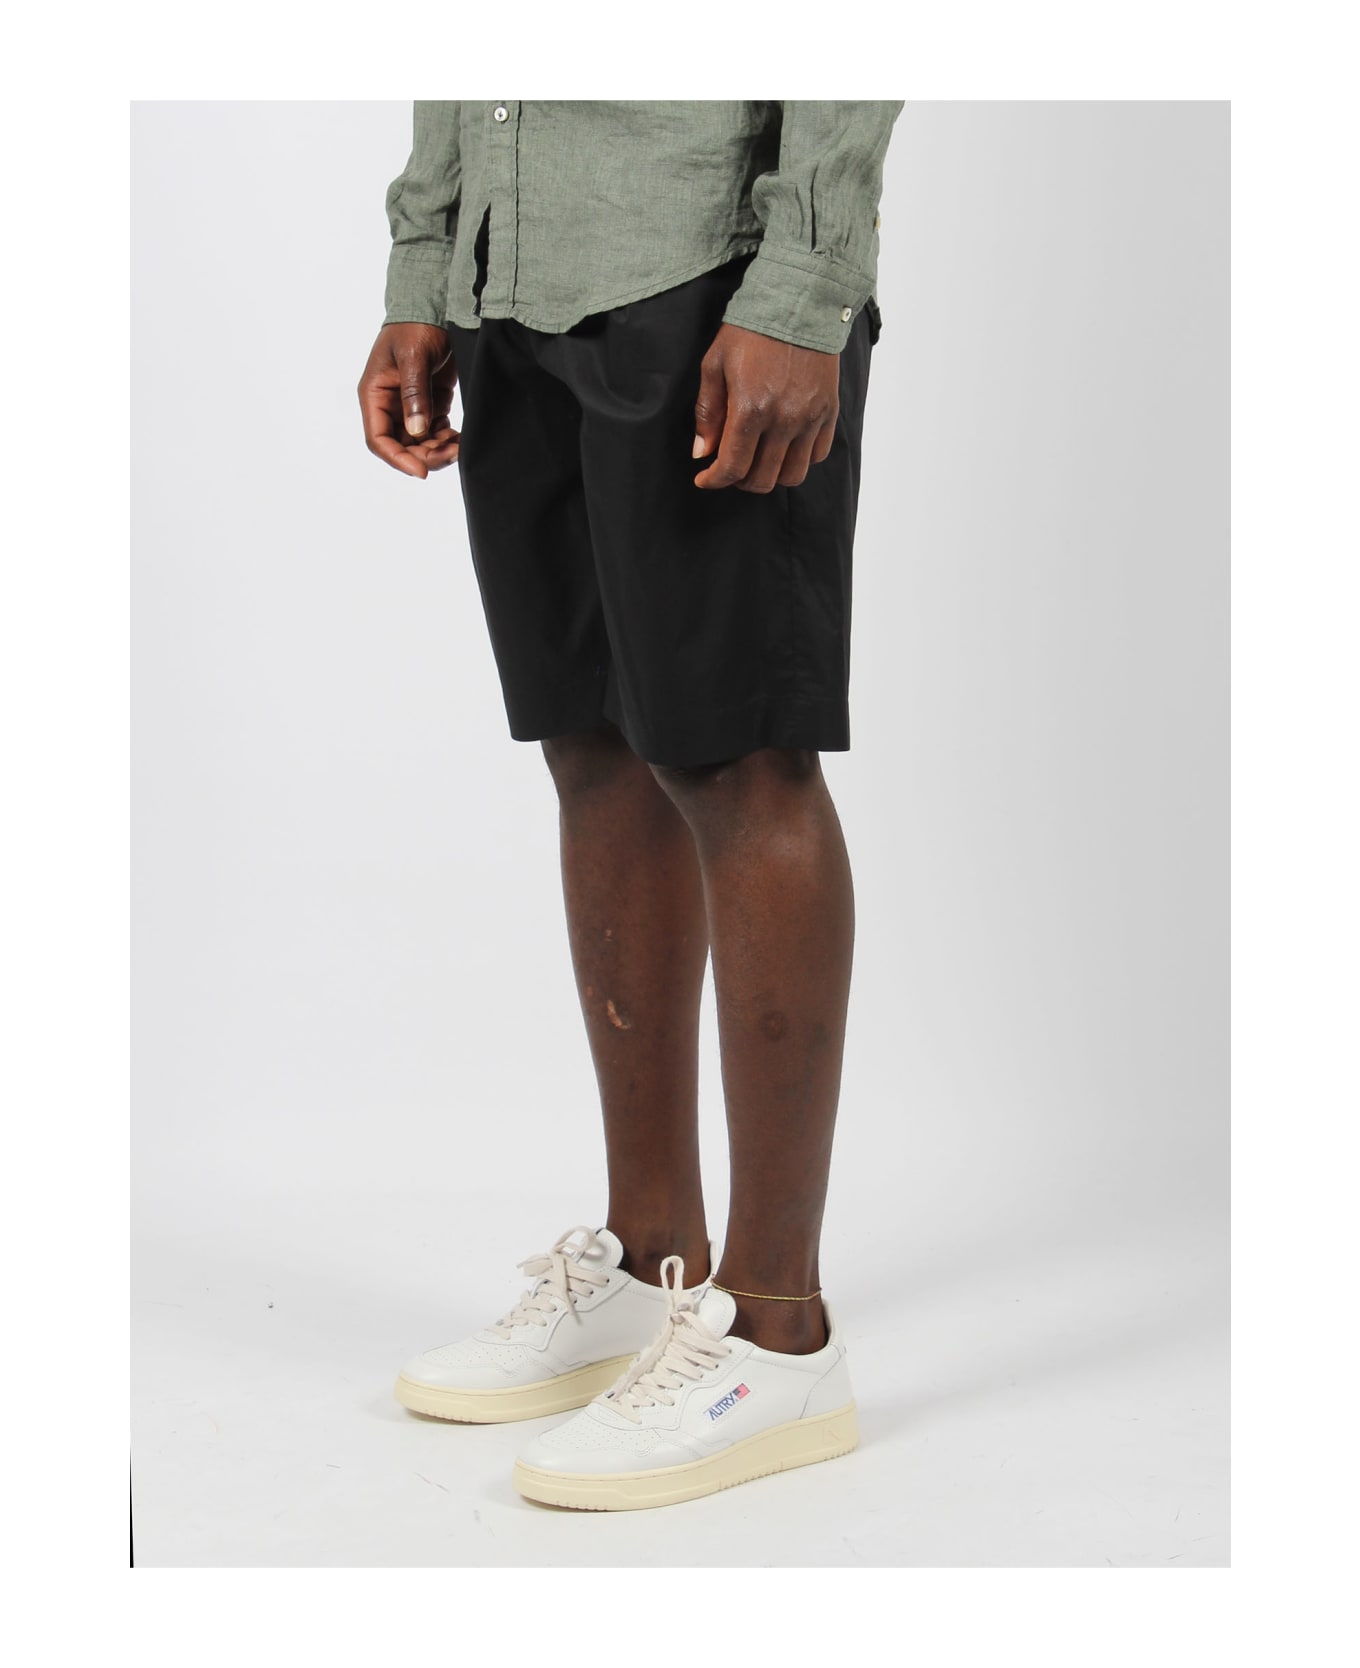 Herno Light Cotton Stretch And Ultralight Crease Shorts - Black